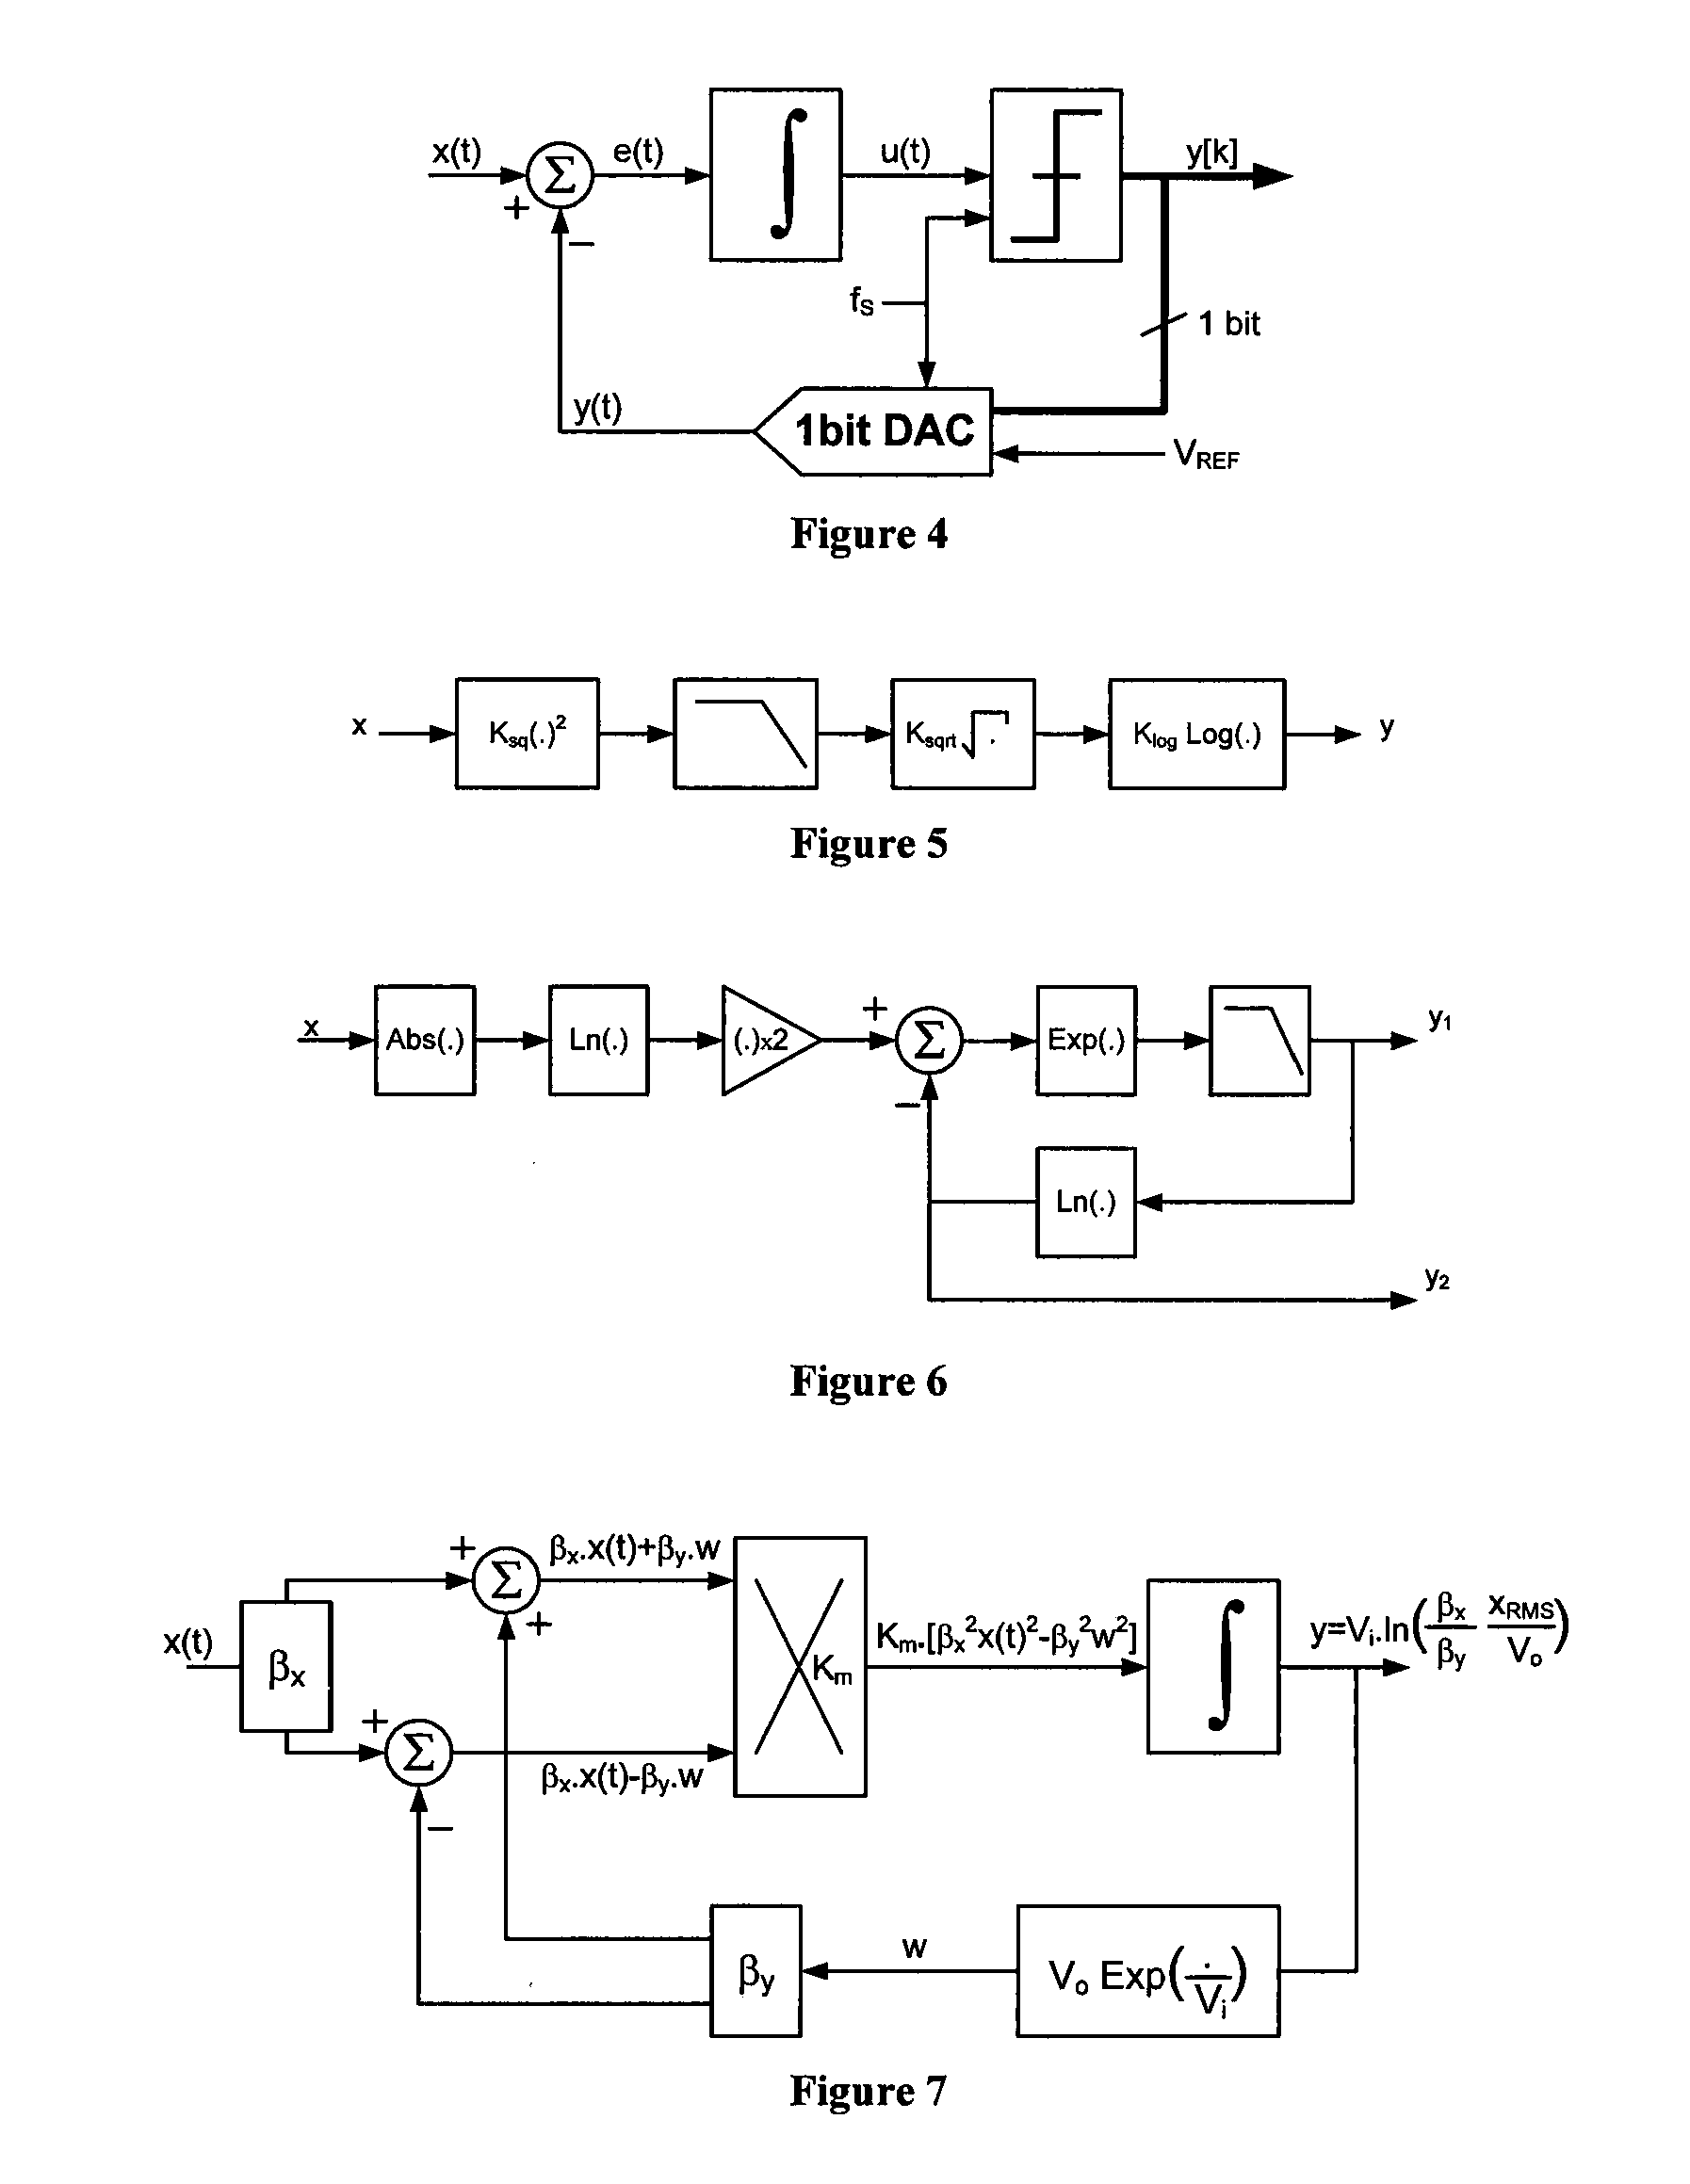 Sigma-delta difference-of-squares log-rms to DC converter with forward path multiplier and chopper stabilization